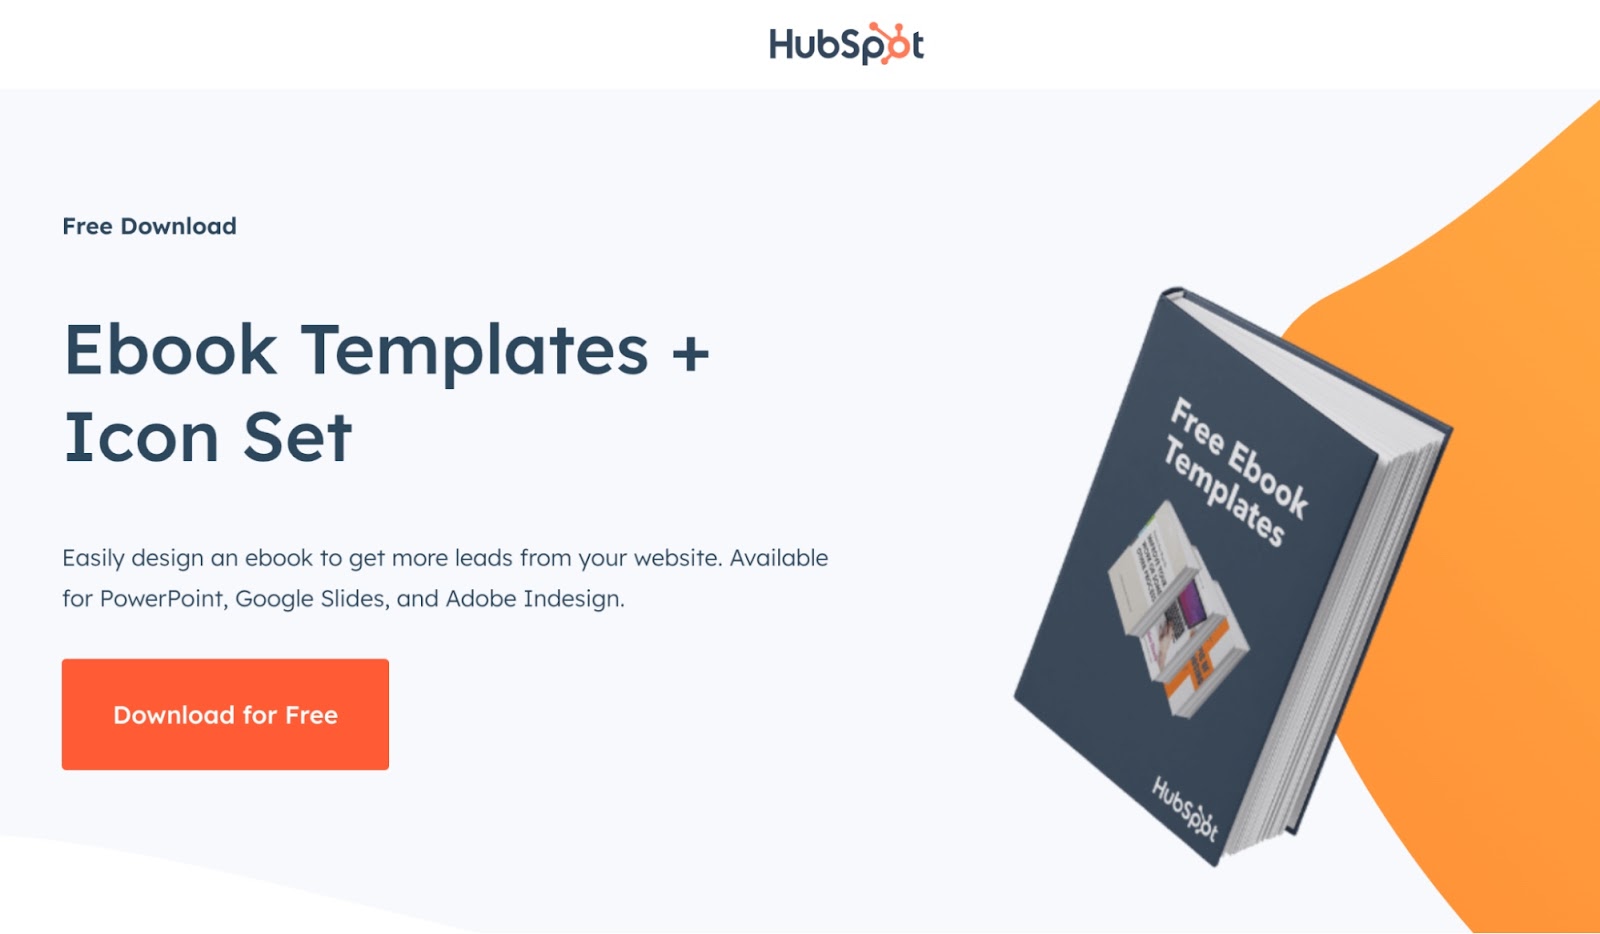 HubSpot's "Ebook Templates + Icon Set" page